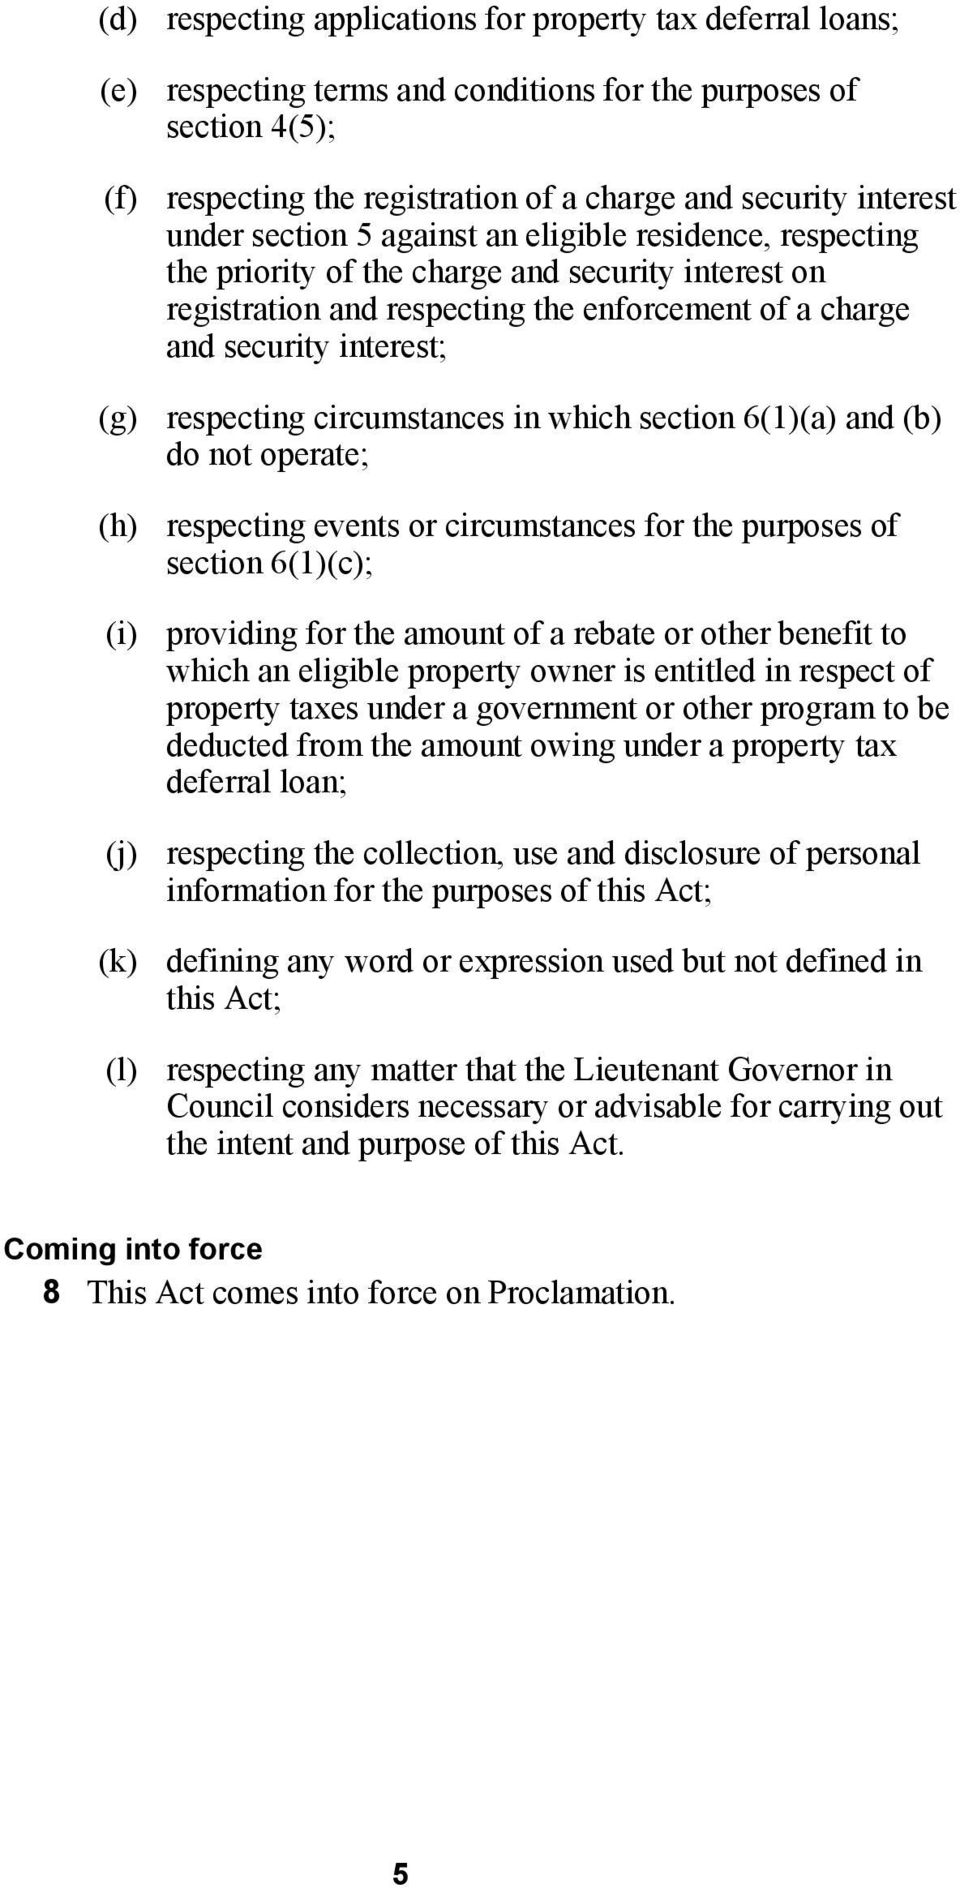 respecting circumstances in which section 6(1)(a) and (b) do not operate; (h) respecting events or circumstances for the purposes of section 6(1)(c); (i) providing for the amount of a rebate or other